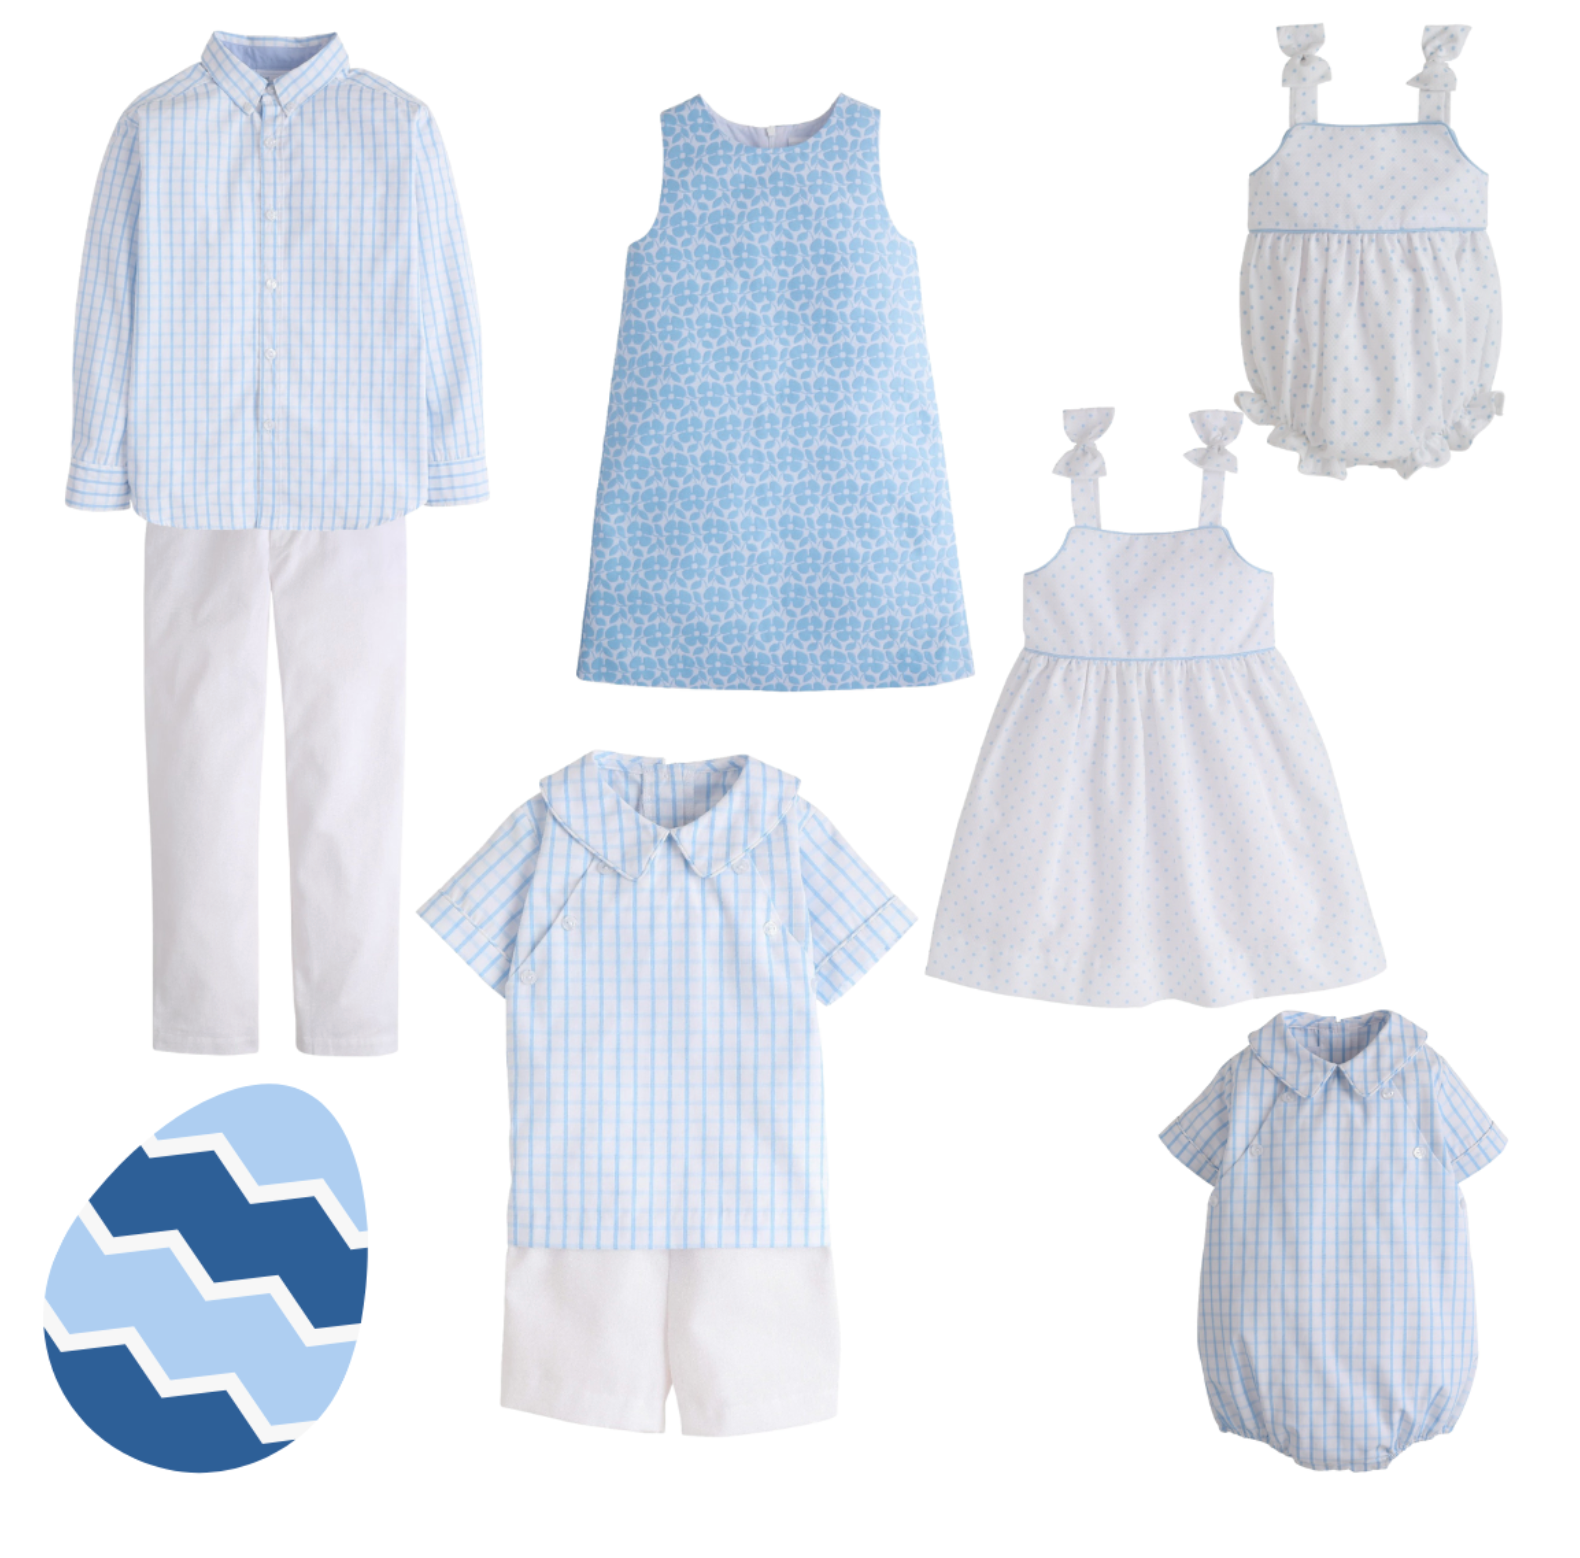 Easter Style Guide: Coordinating Family Outfits